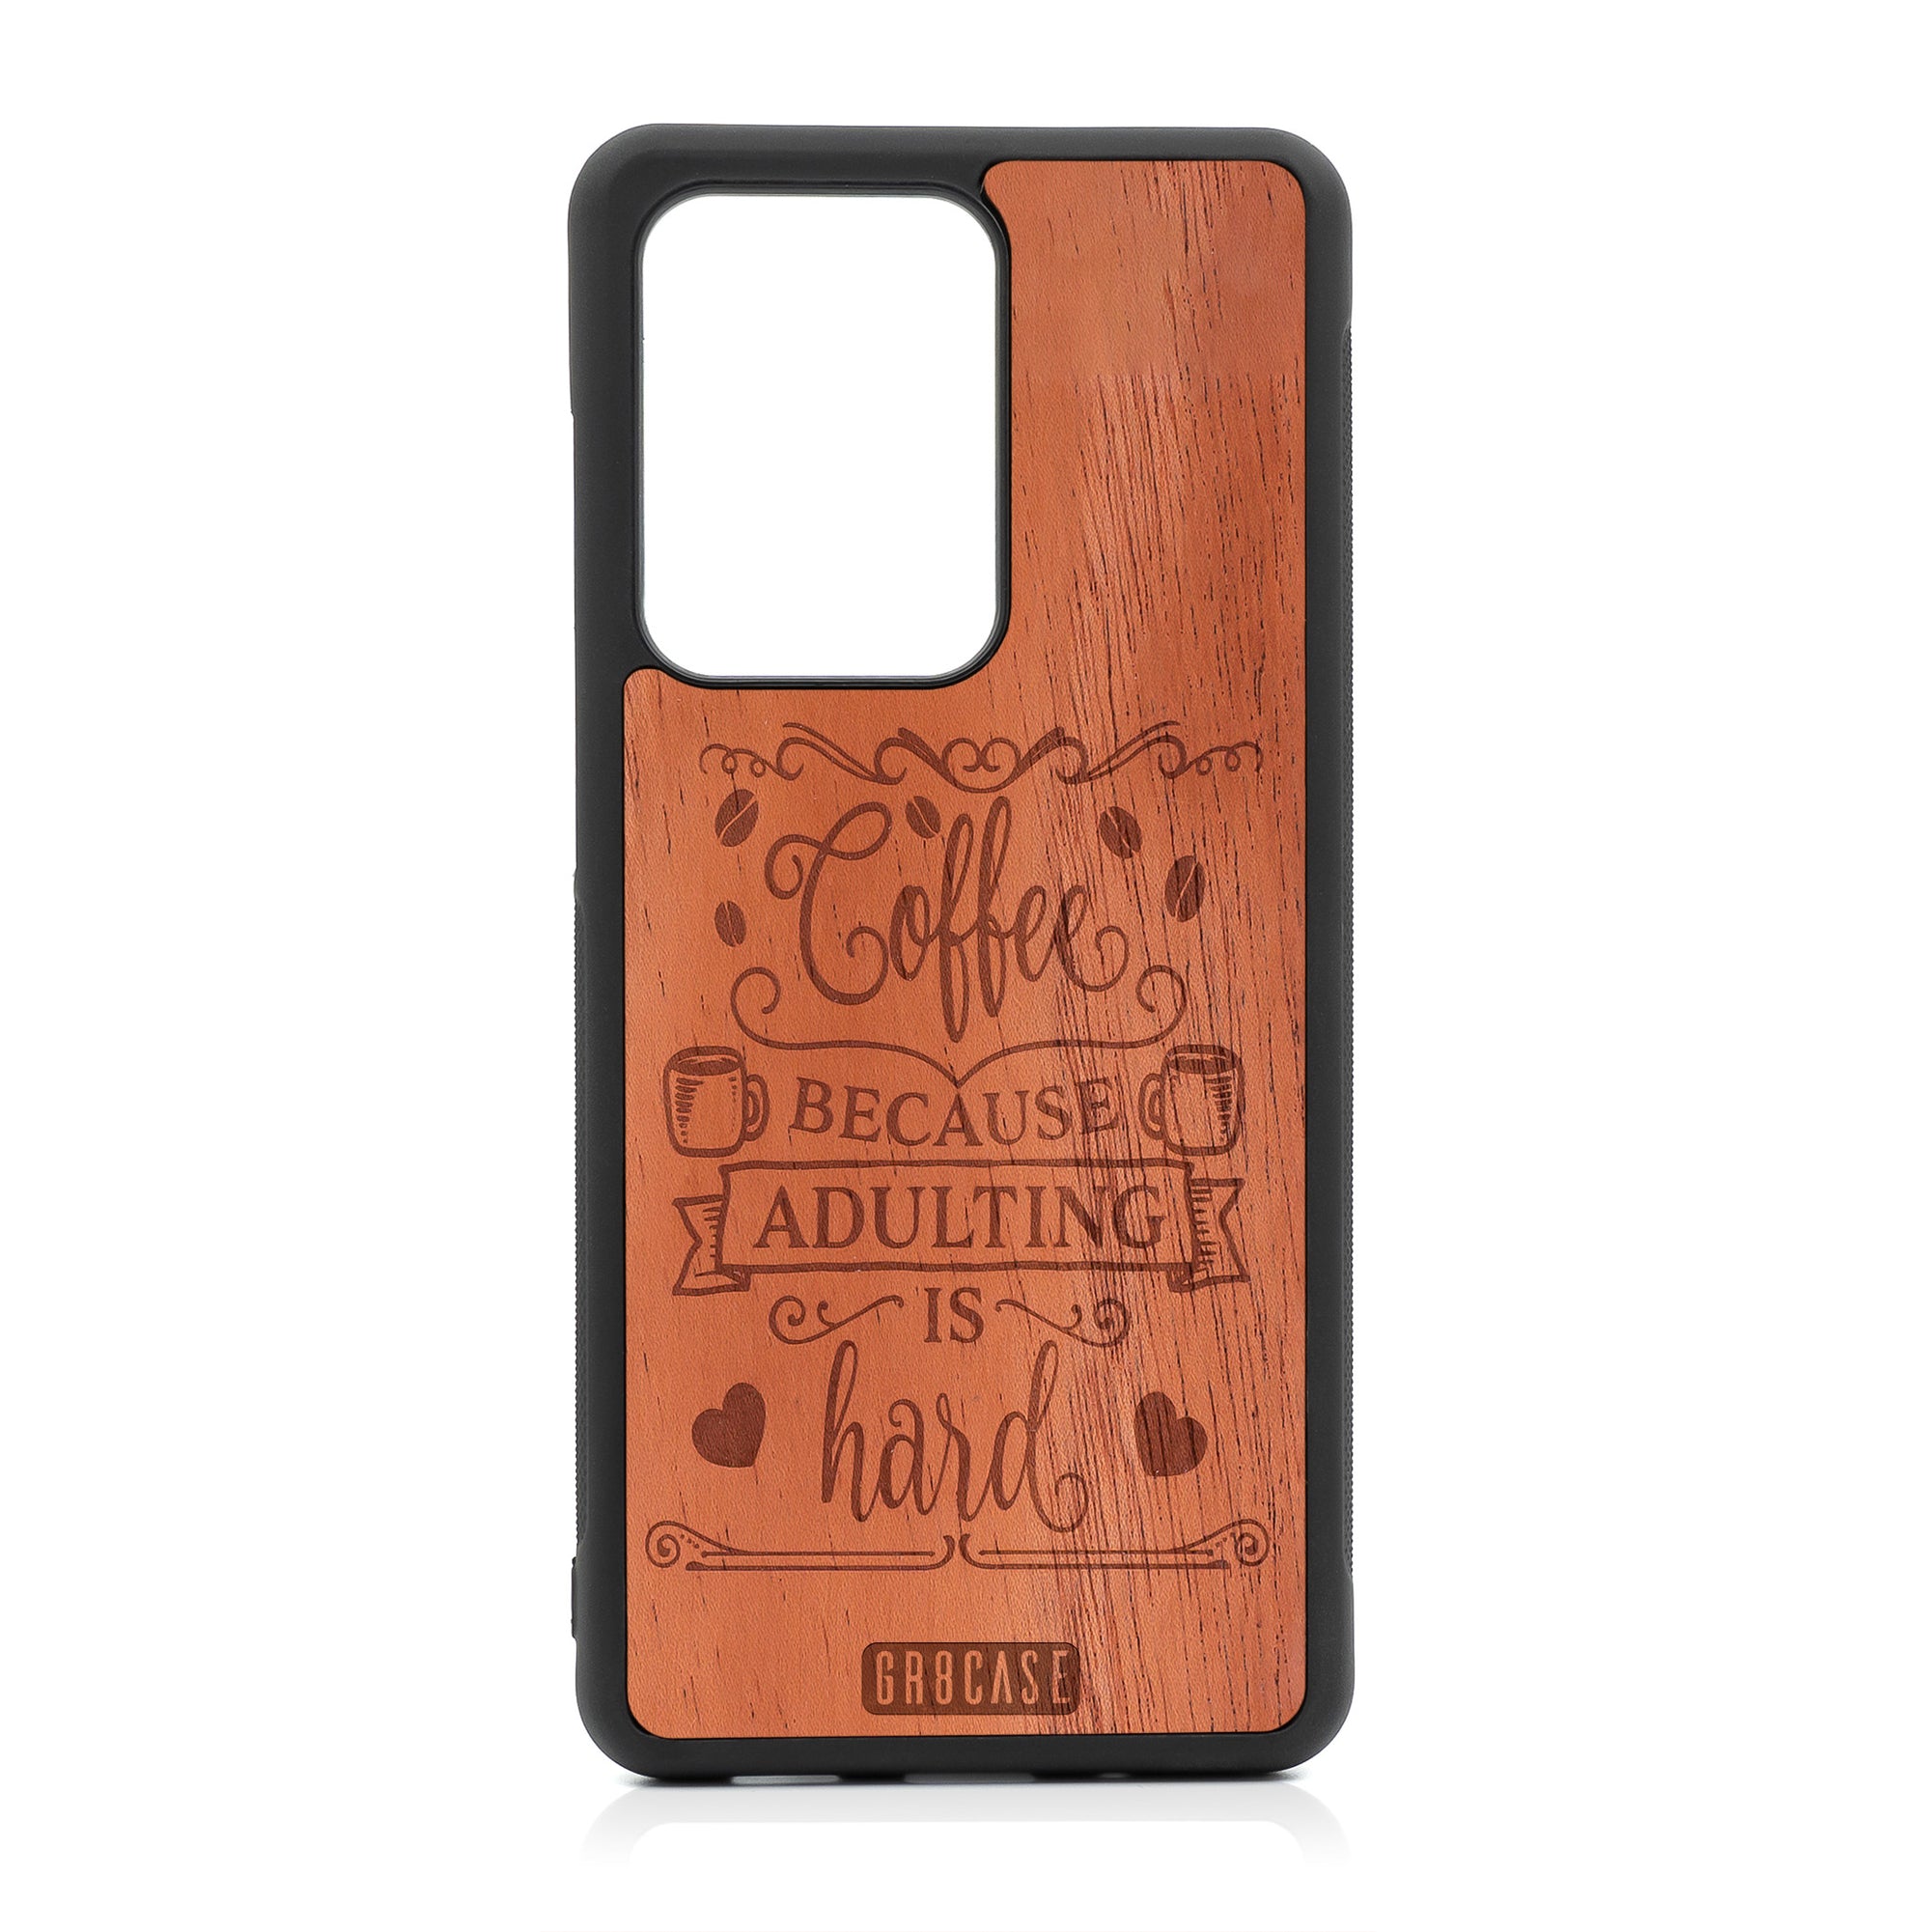 Coffee Because Adulting Is Hard Design Wood Case For Samsung Galaxy S20 Ultra